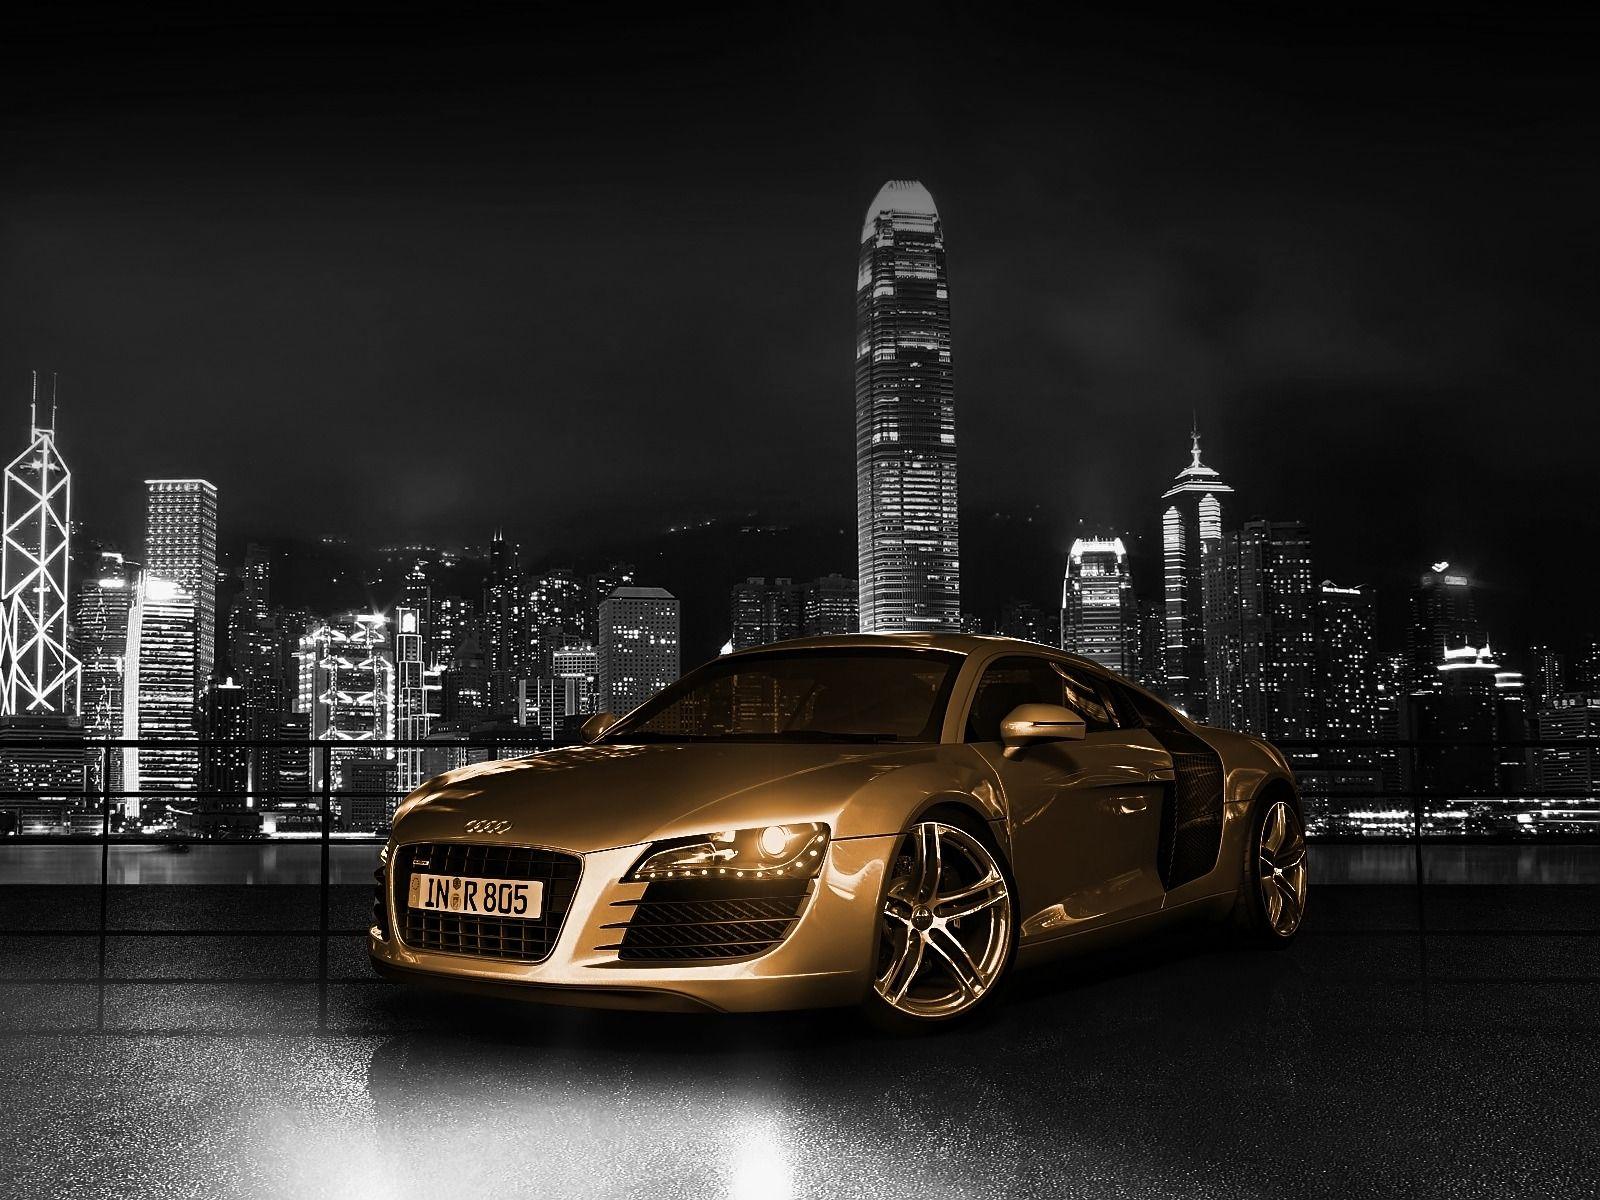 Black and Gold Car Wallpaper Free Black and Gold Car